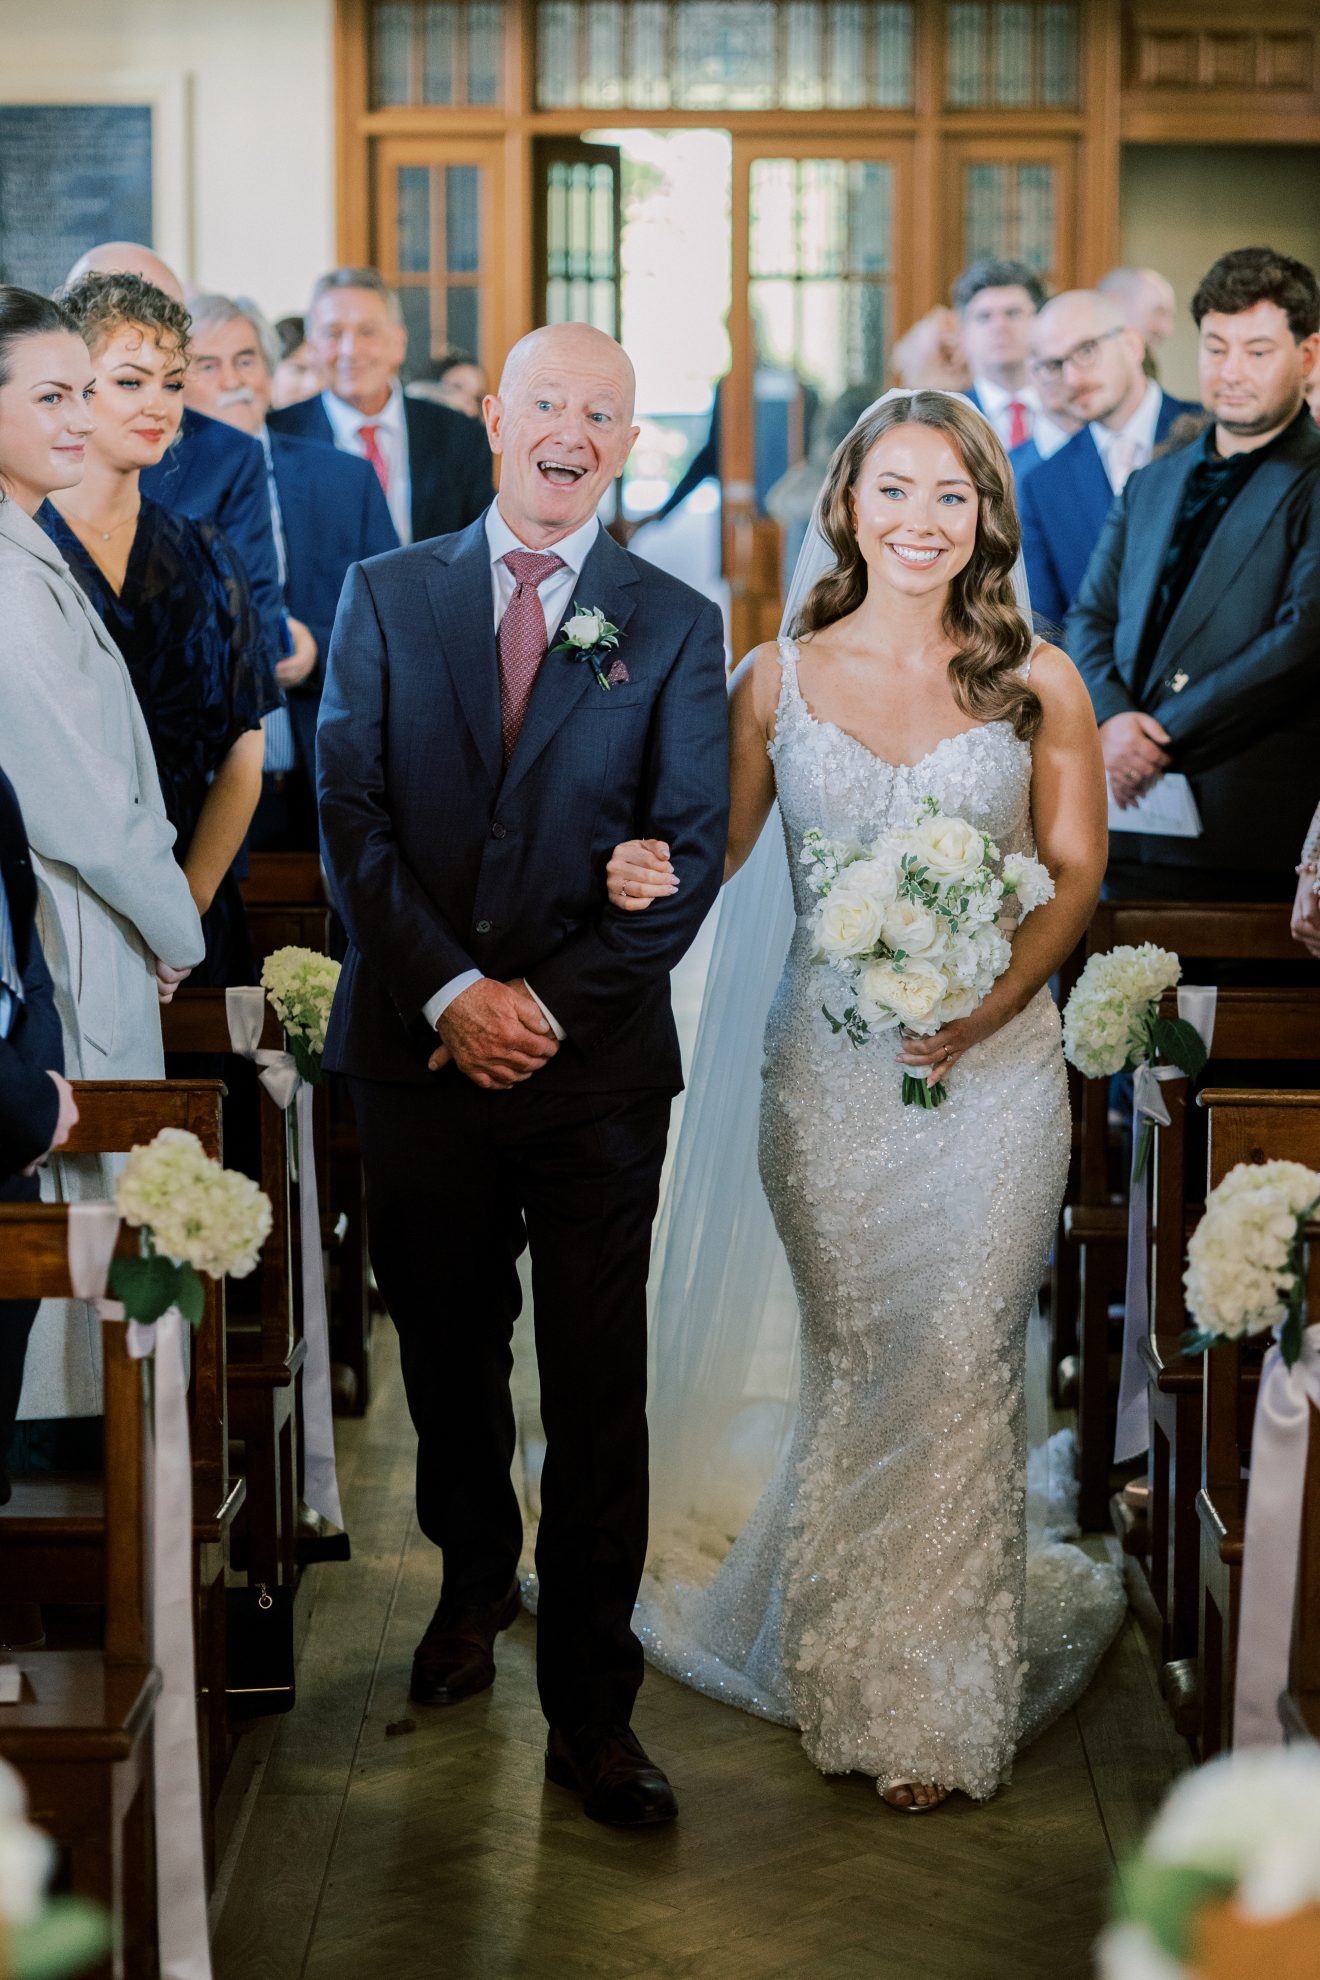 Jean walking down the aisle with her dad